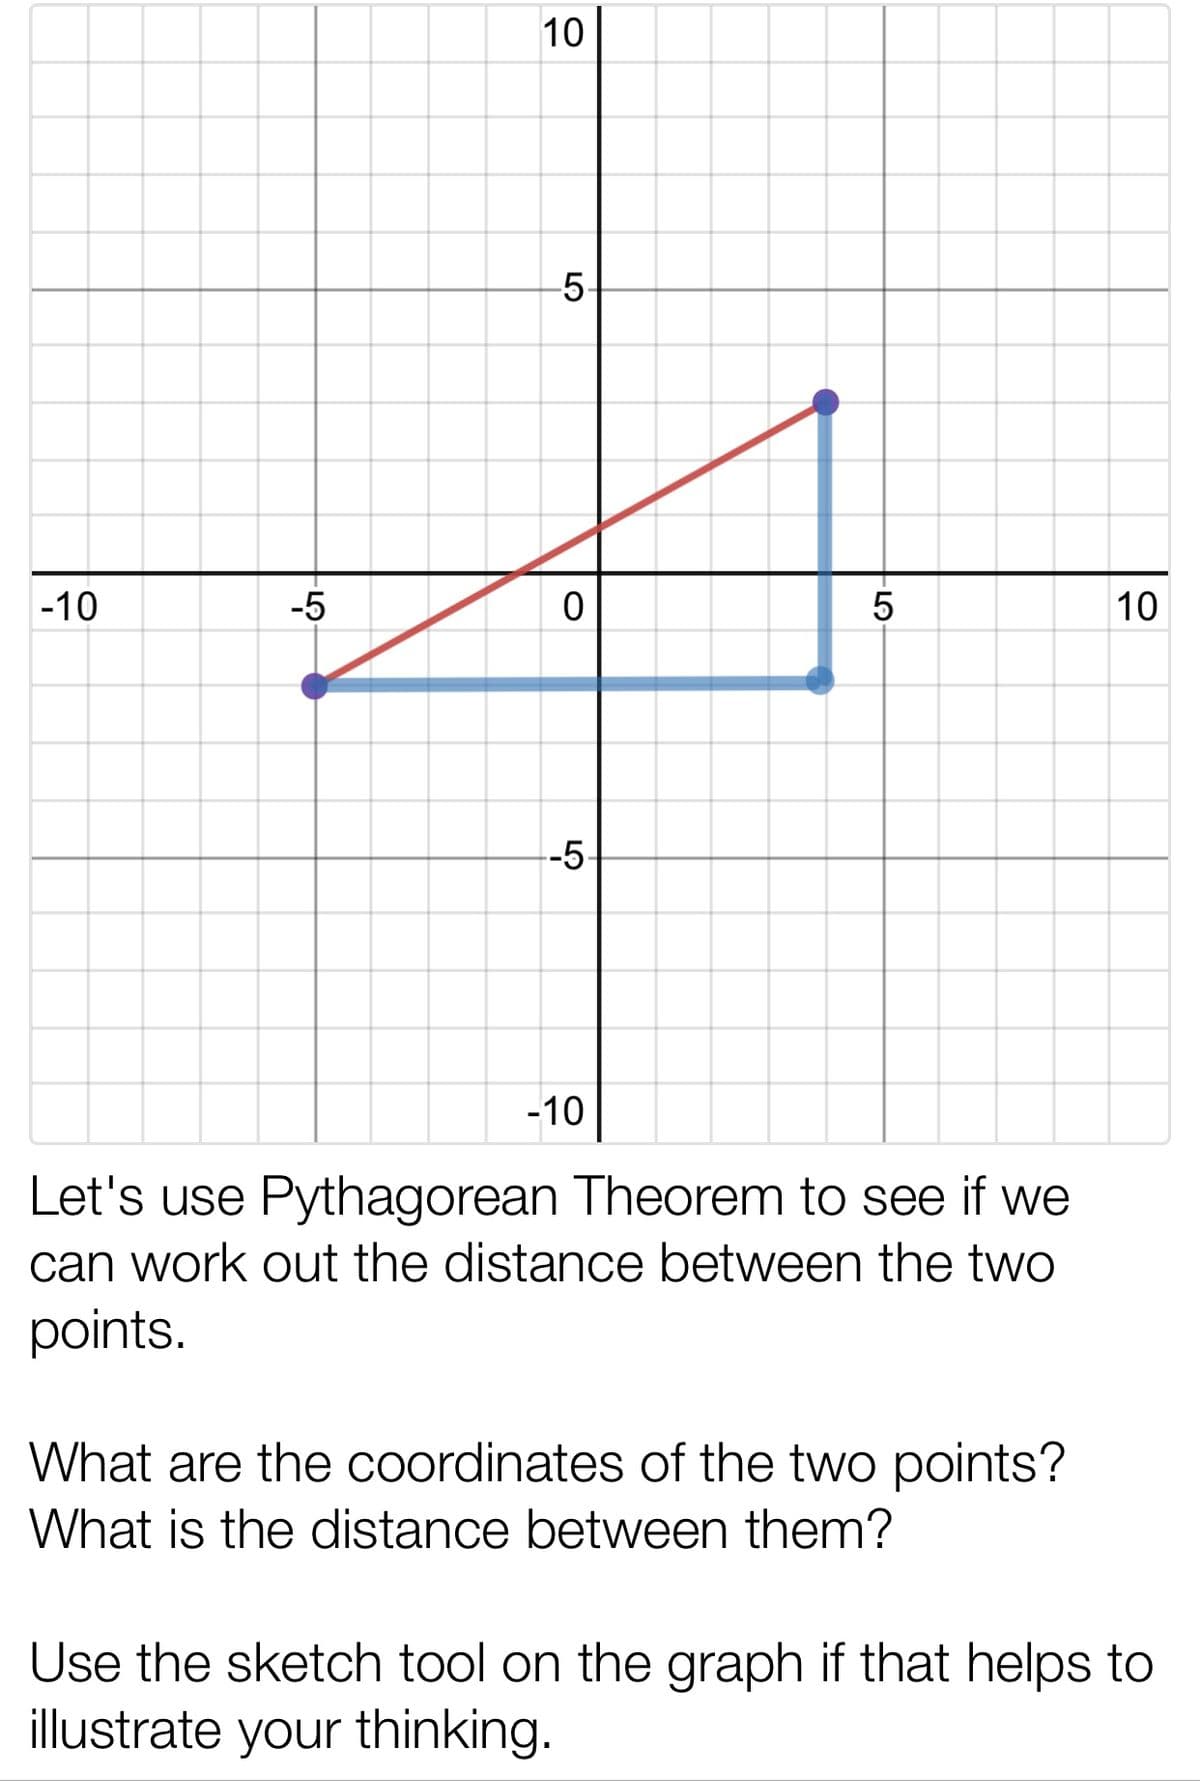 5-
-10
-5
10
-5
-10
Let's use Pythagorean Theorem to see if we
can work out the distance between the two
points.
What are the coordinates of the two points?
What is the distance between them?
Use the sketch tool on the graph if that helps to
illustrate your thinking.
10
LO
